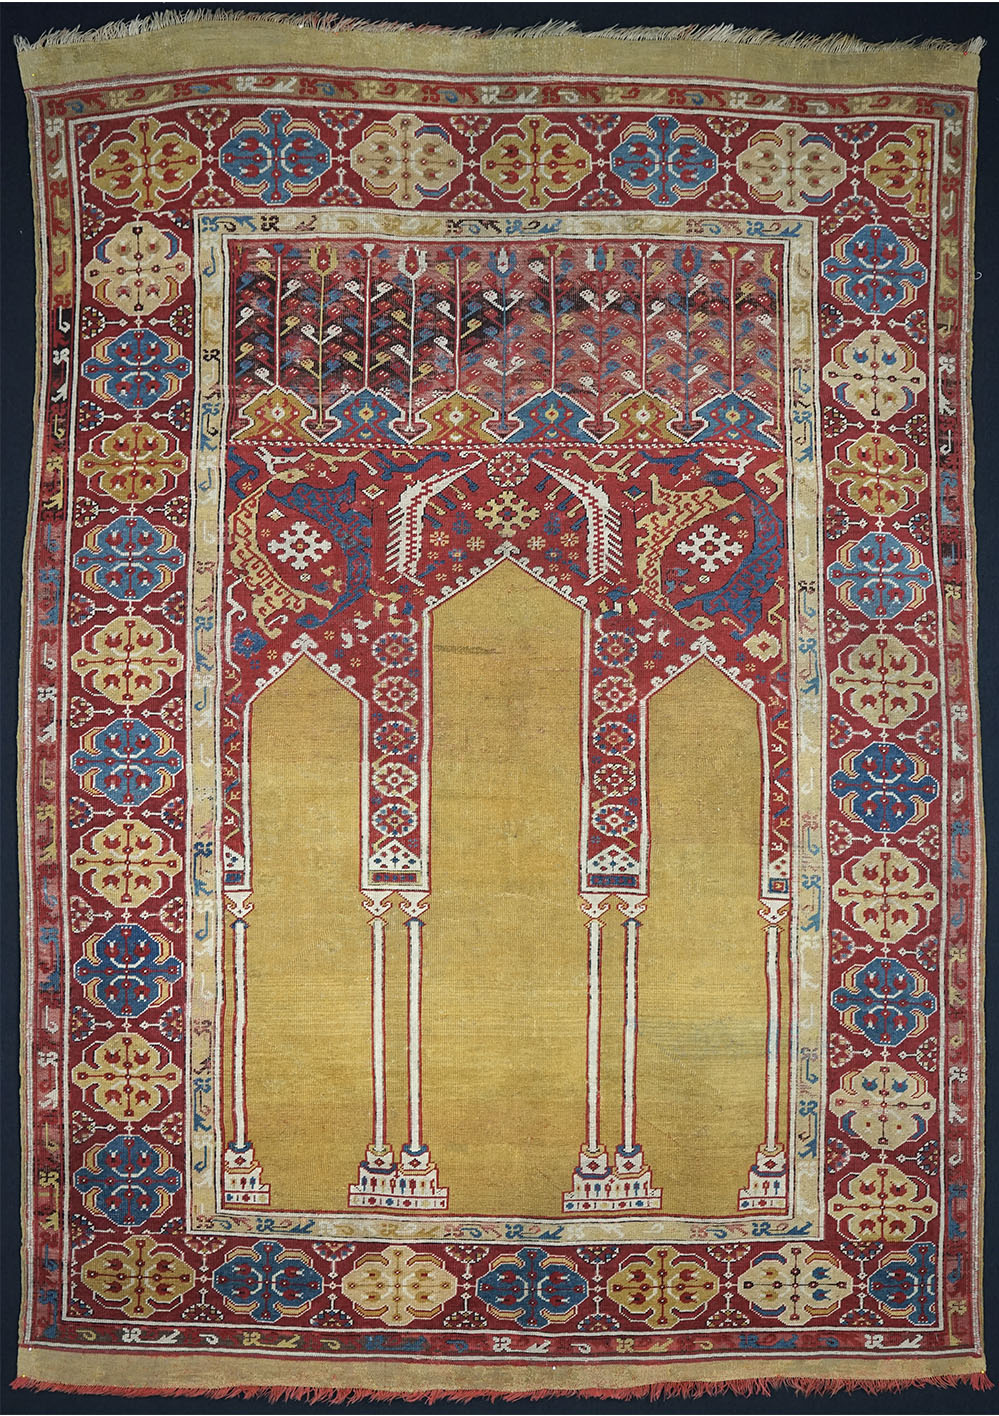 Transylvanian’ coupled-column prayer rug, Ushak region, west Anatolia, early 17th century. 1.30 x 1.83 m (4' 3" x 6' 0"). Warp: natural ivory wool, spun Z2S, dyed light red at the lower end, slightly depressed; weft: wool, spun Z, two shoots between each row of knots, generally ivory or dyed light red, occasionally light blue; knots: wool, symmetrical (Turkish), ca. 50 vertical x 38 horizontal, average density ca. 1,900/dm2 = ca. 123/in2; colours: (9) ochre yellow, light yellow, pinkish beige, ivory, red, light blue, medium blue, dark blue, dark brown (corroded). Arkas Collection, Izmir